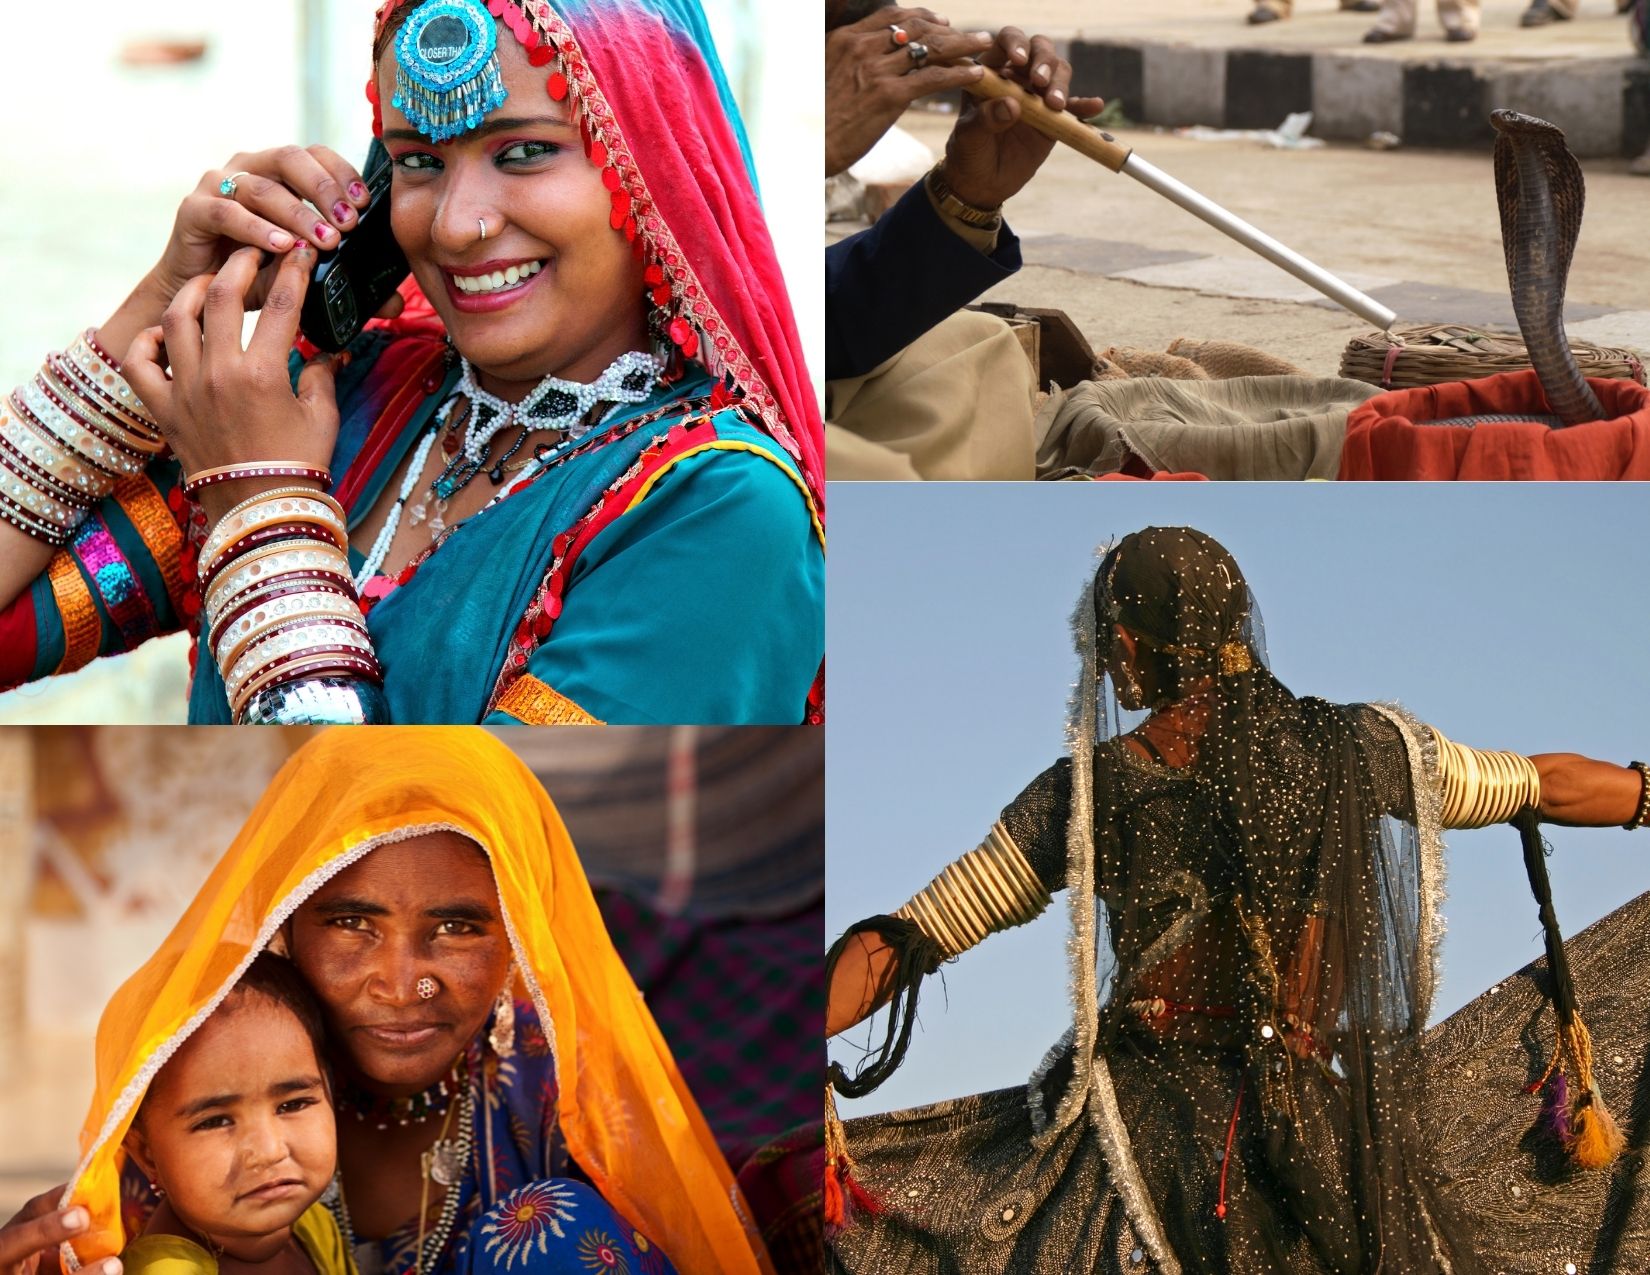 Most Popular Traditional Folk Music and Dance of Rajasthan